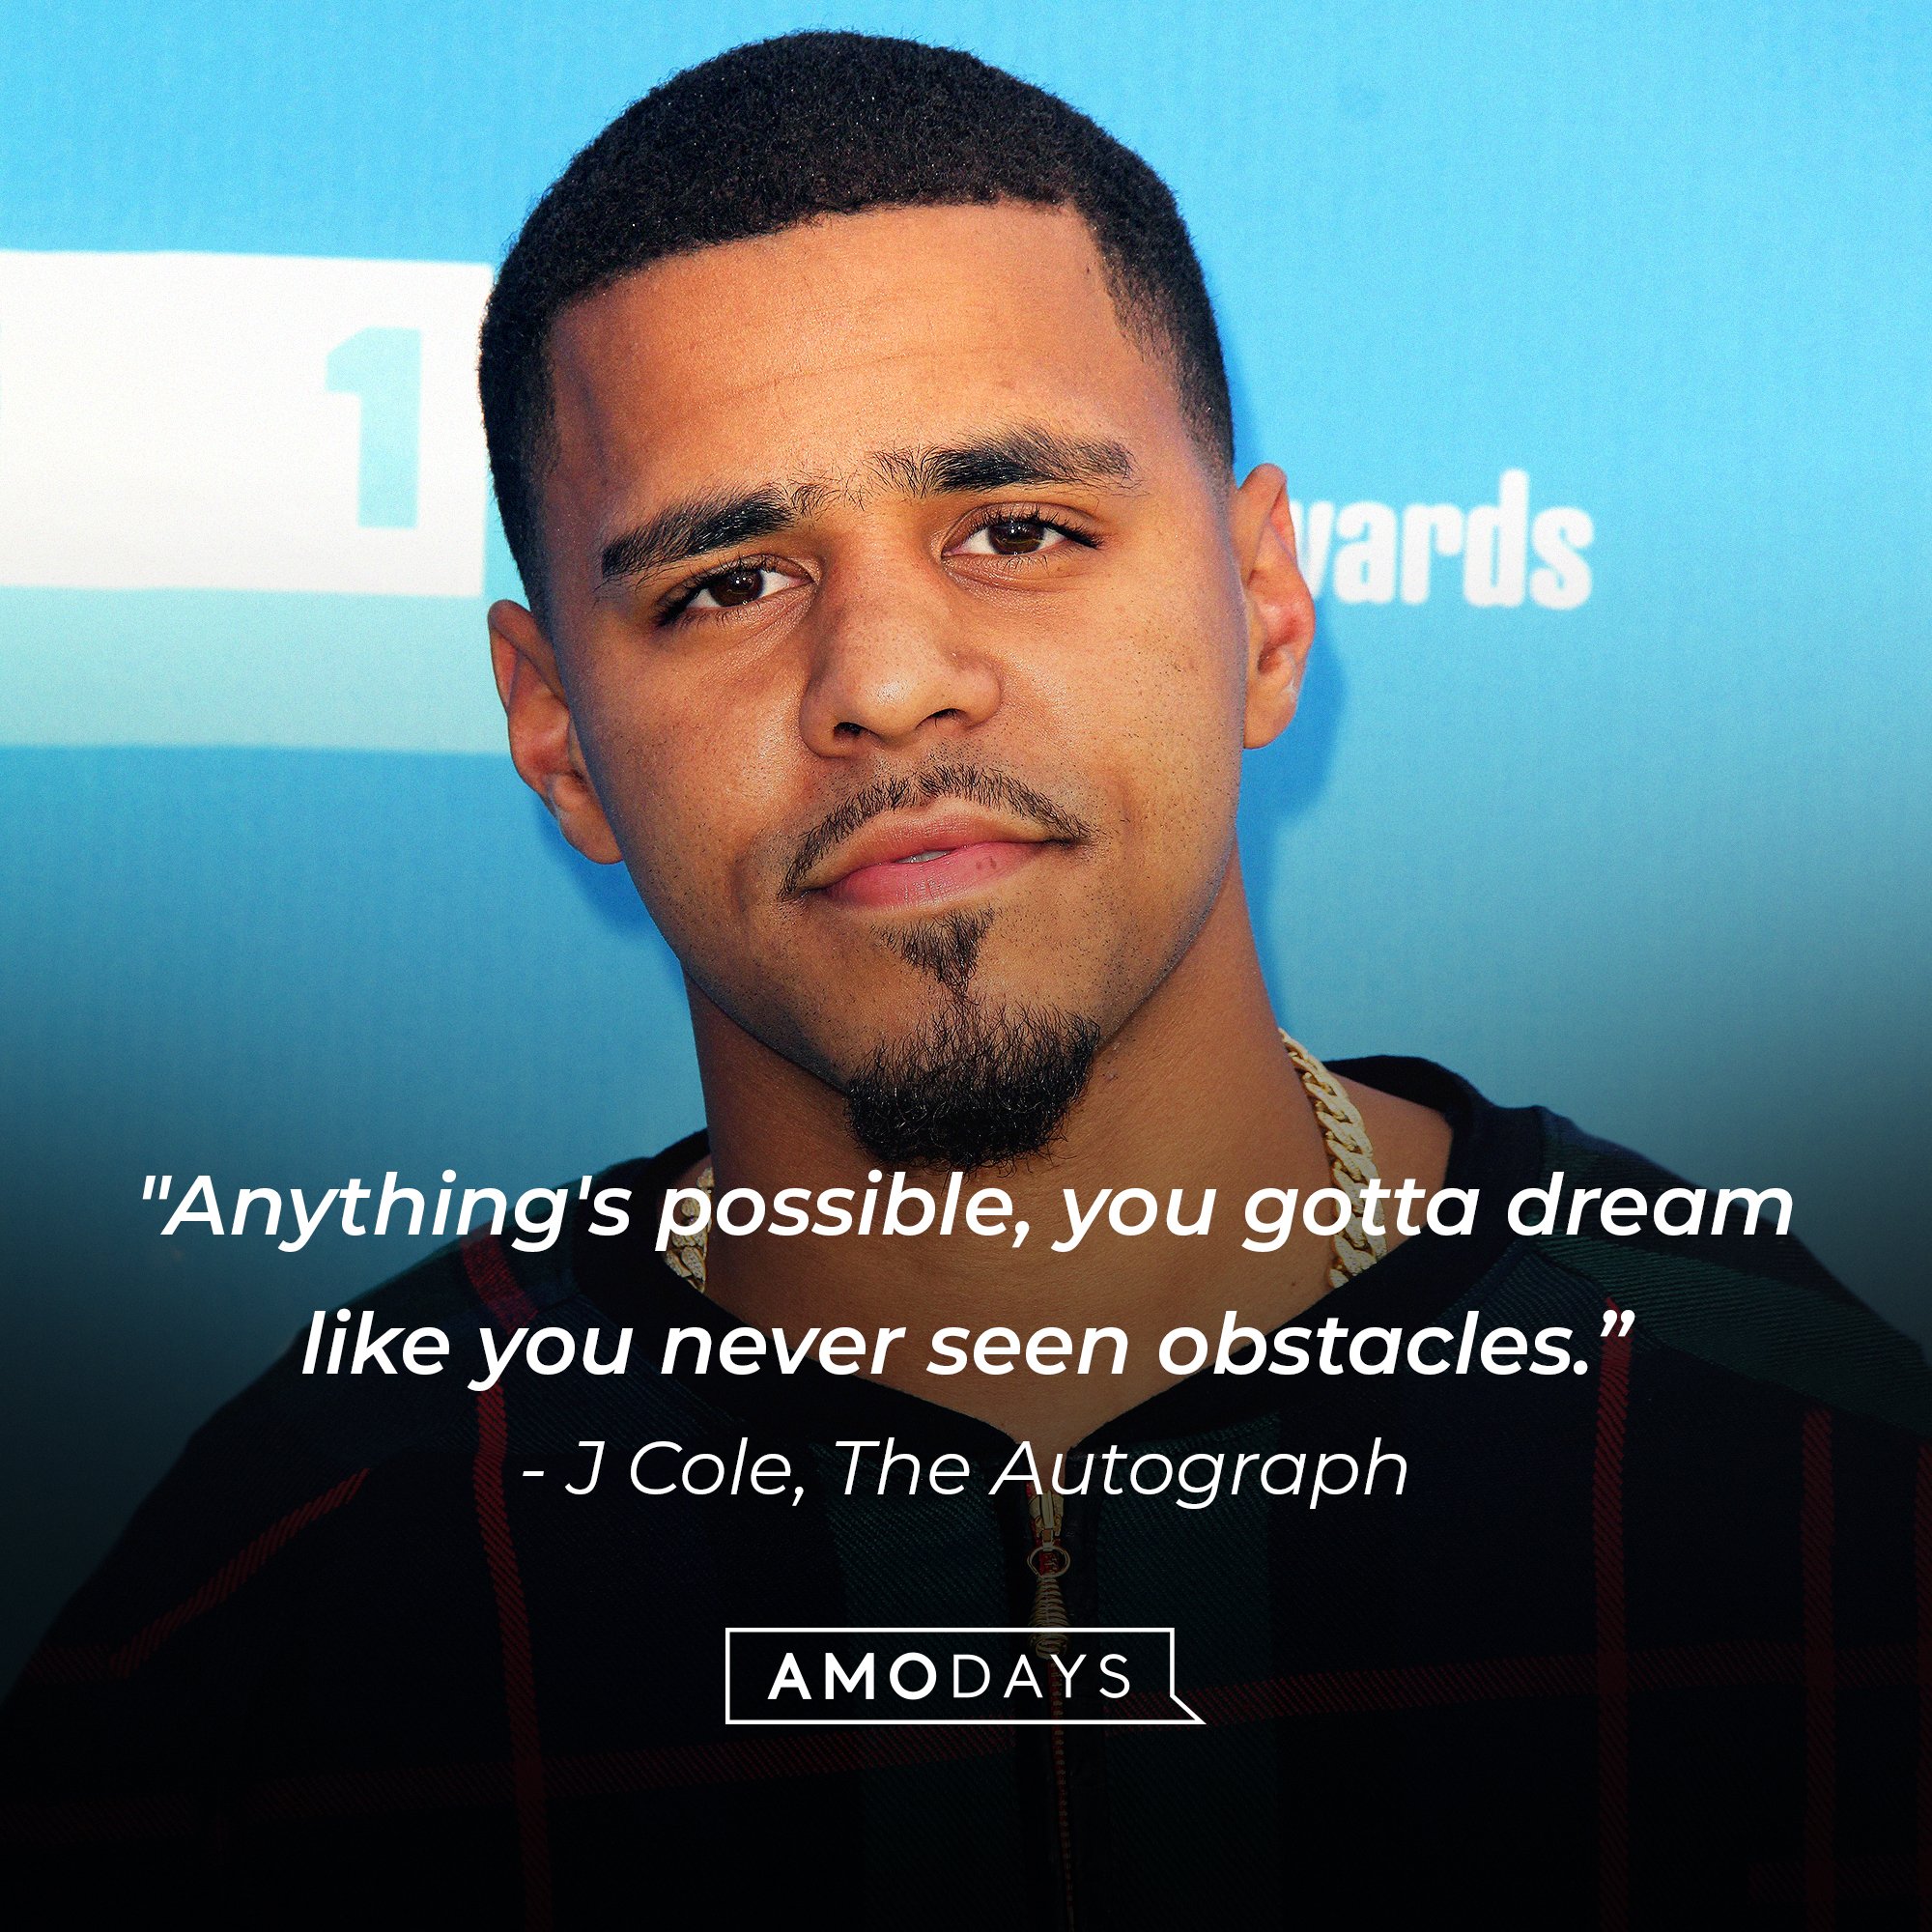 J Cole's quote: "Anything's possible, you gotta dream like you never seen obstacles.” | images: AmoDays